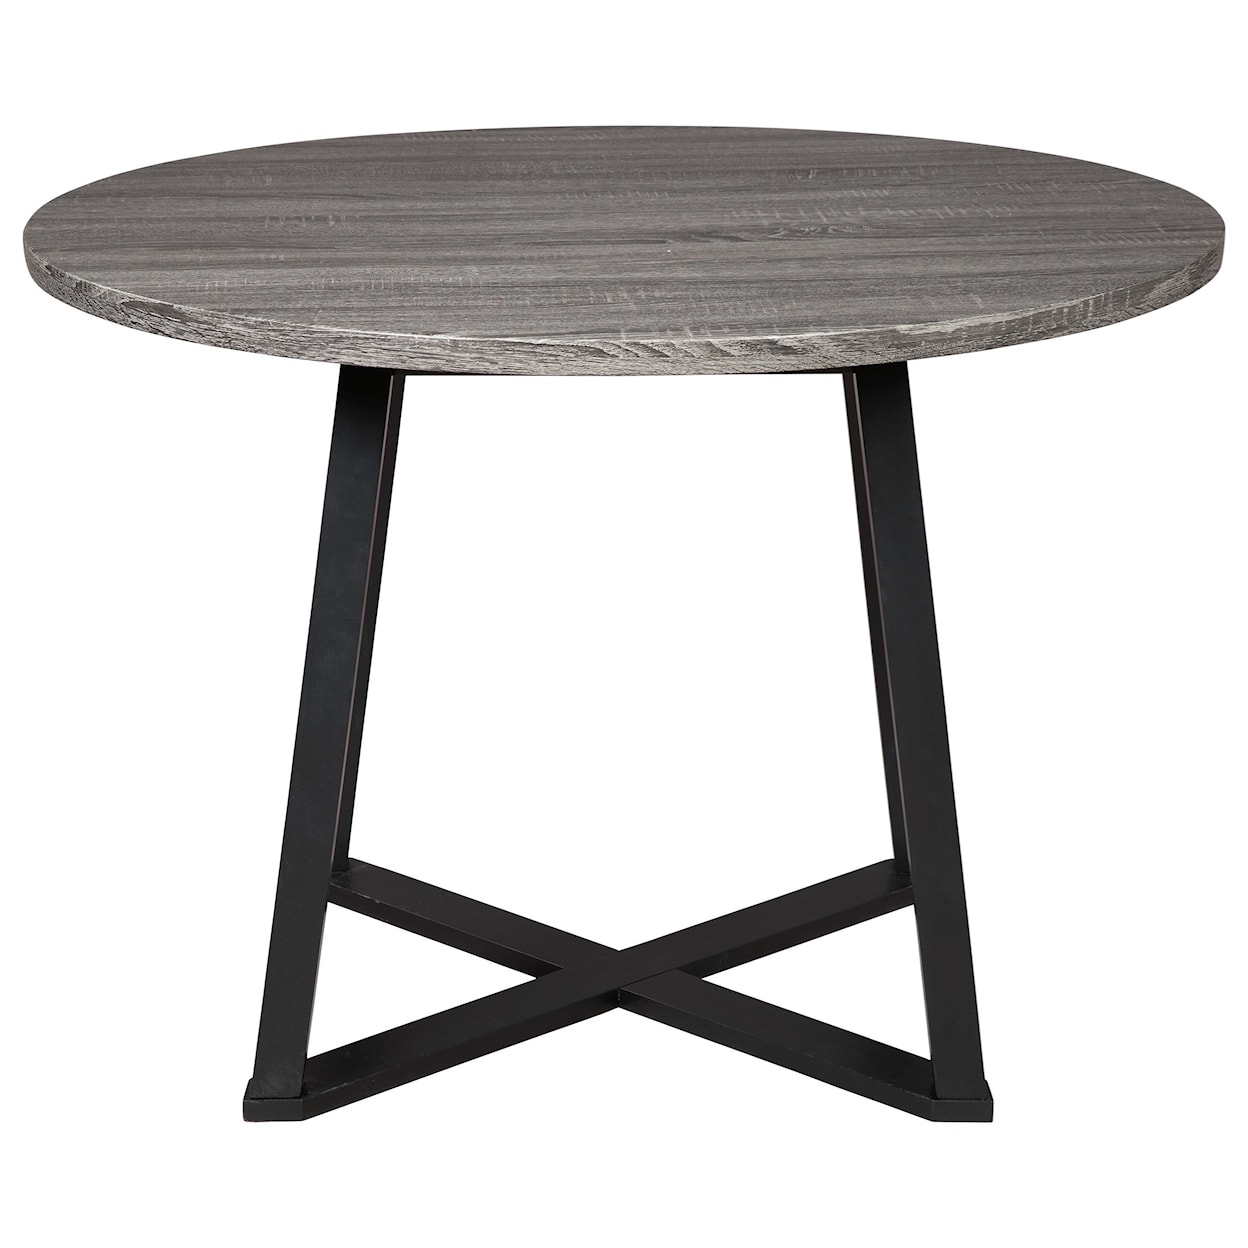 Signature Design by Ashley Centiar 5-Piece Round Dining Table Set